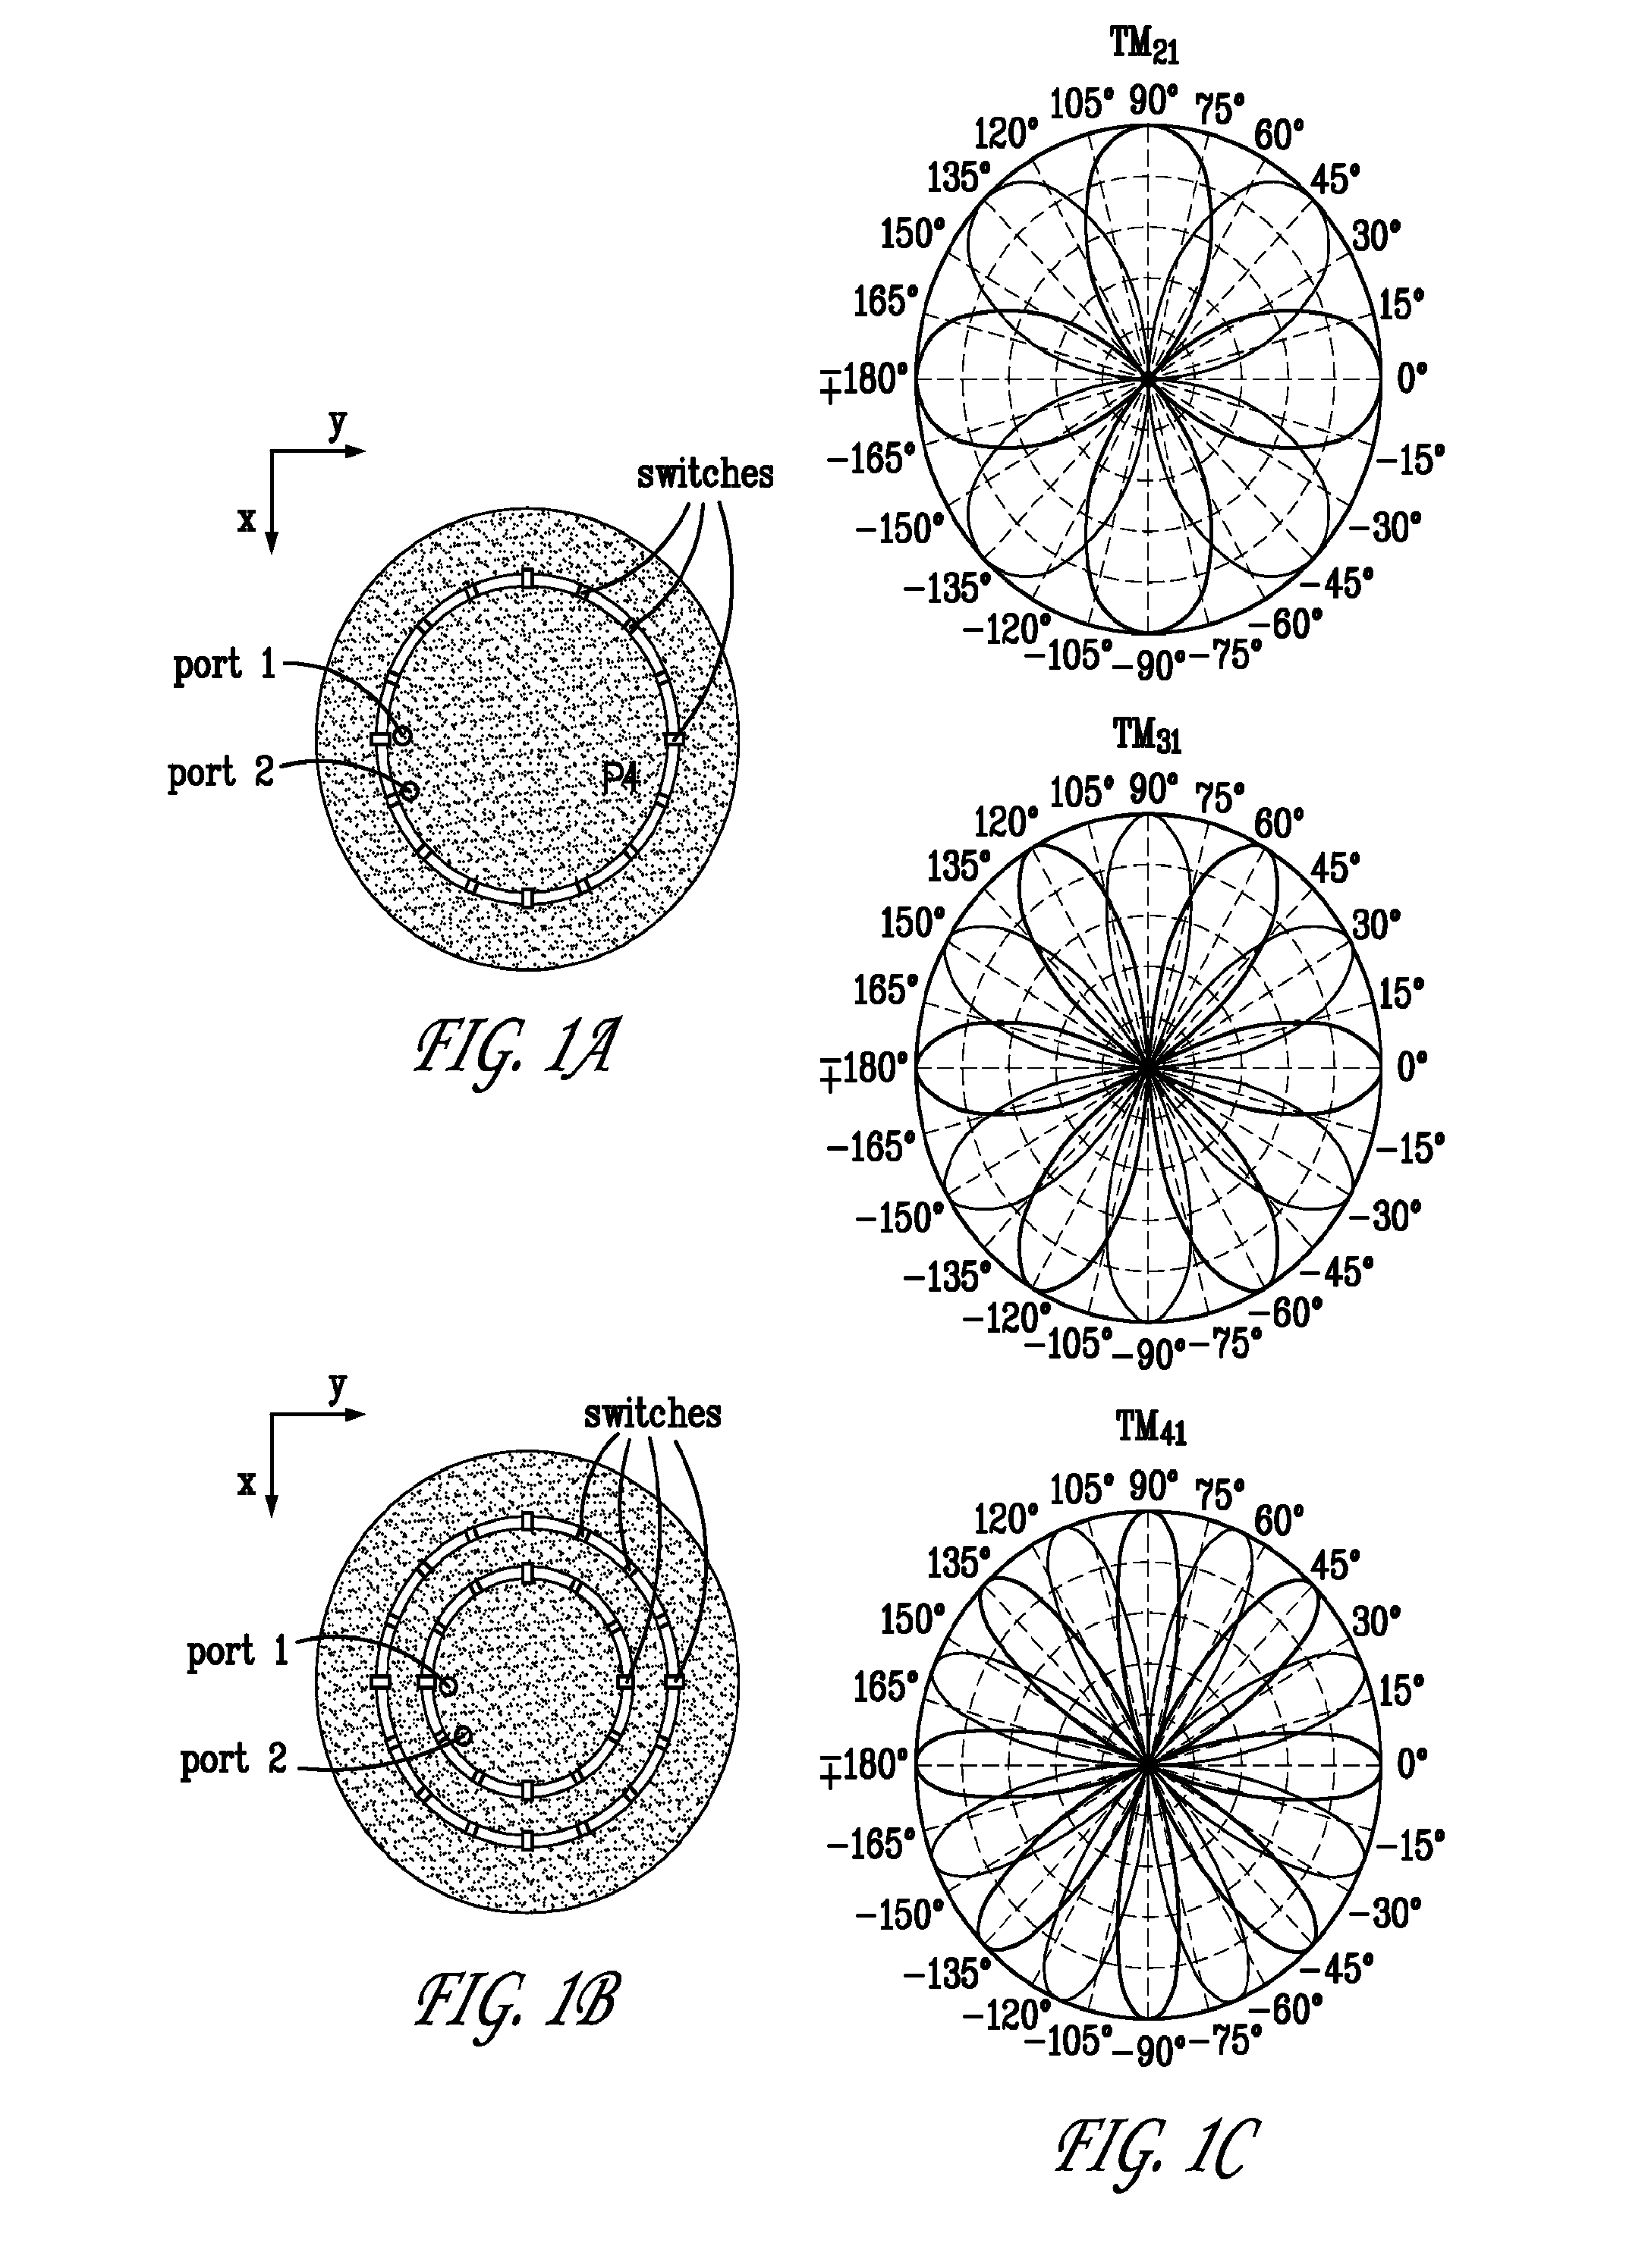 Systems and methods for selecting reconfigurable antennas in MIMO systems